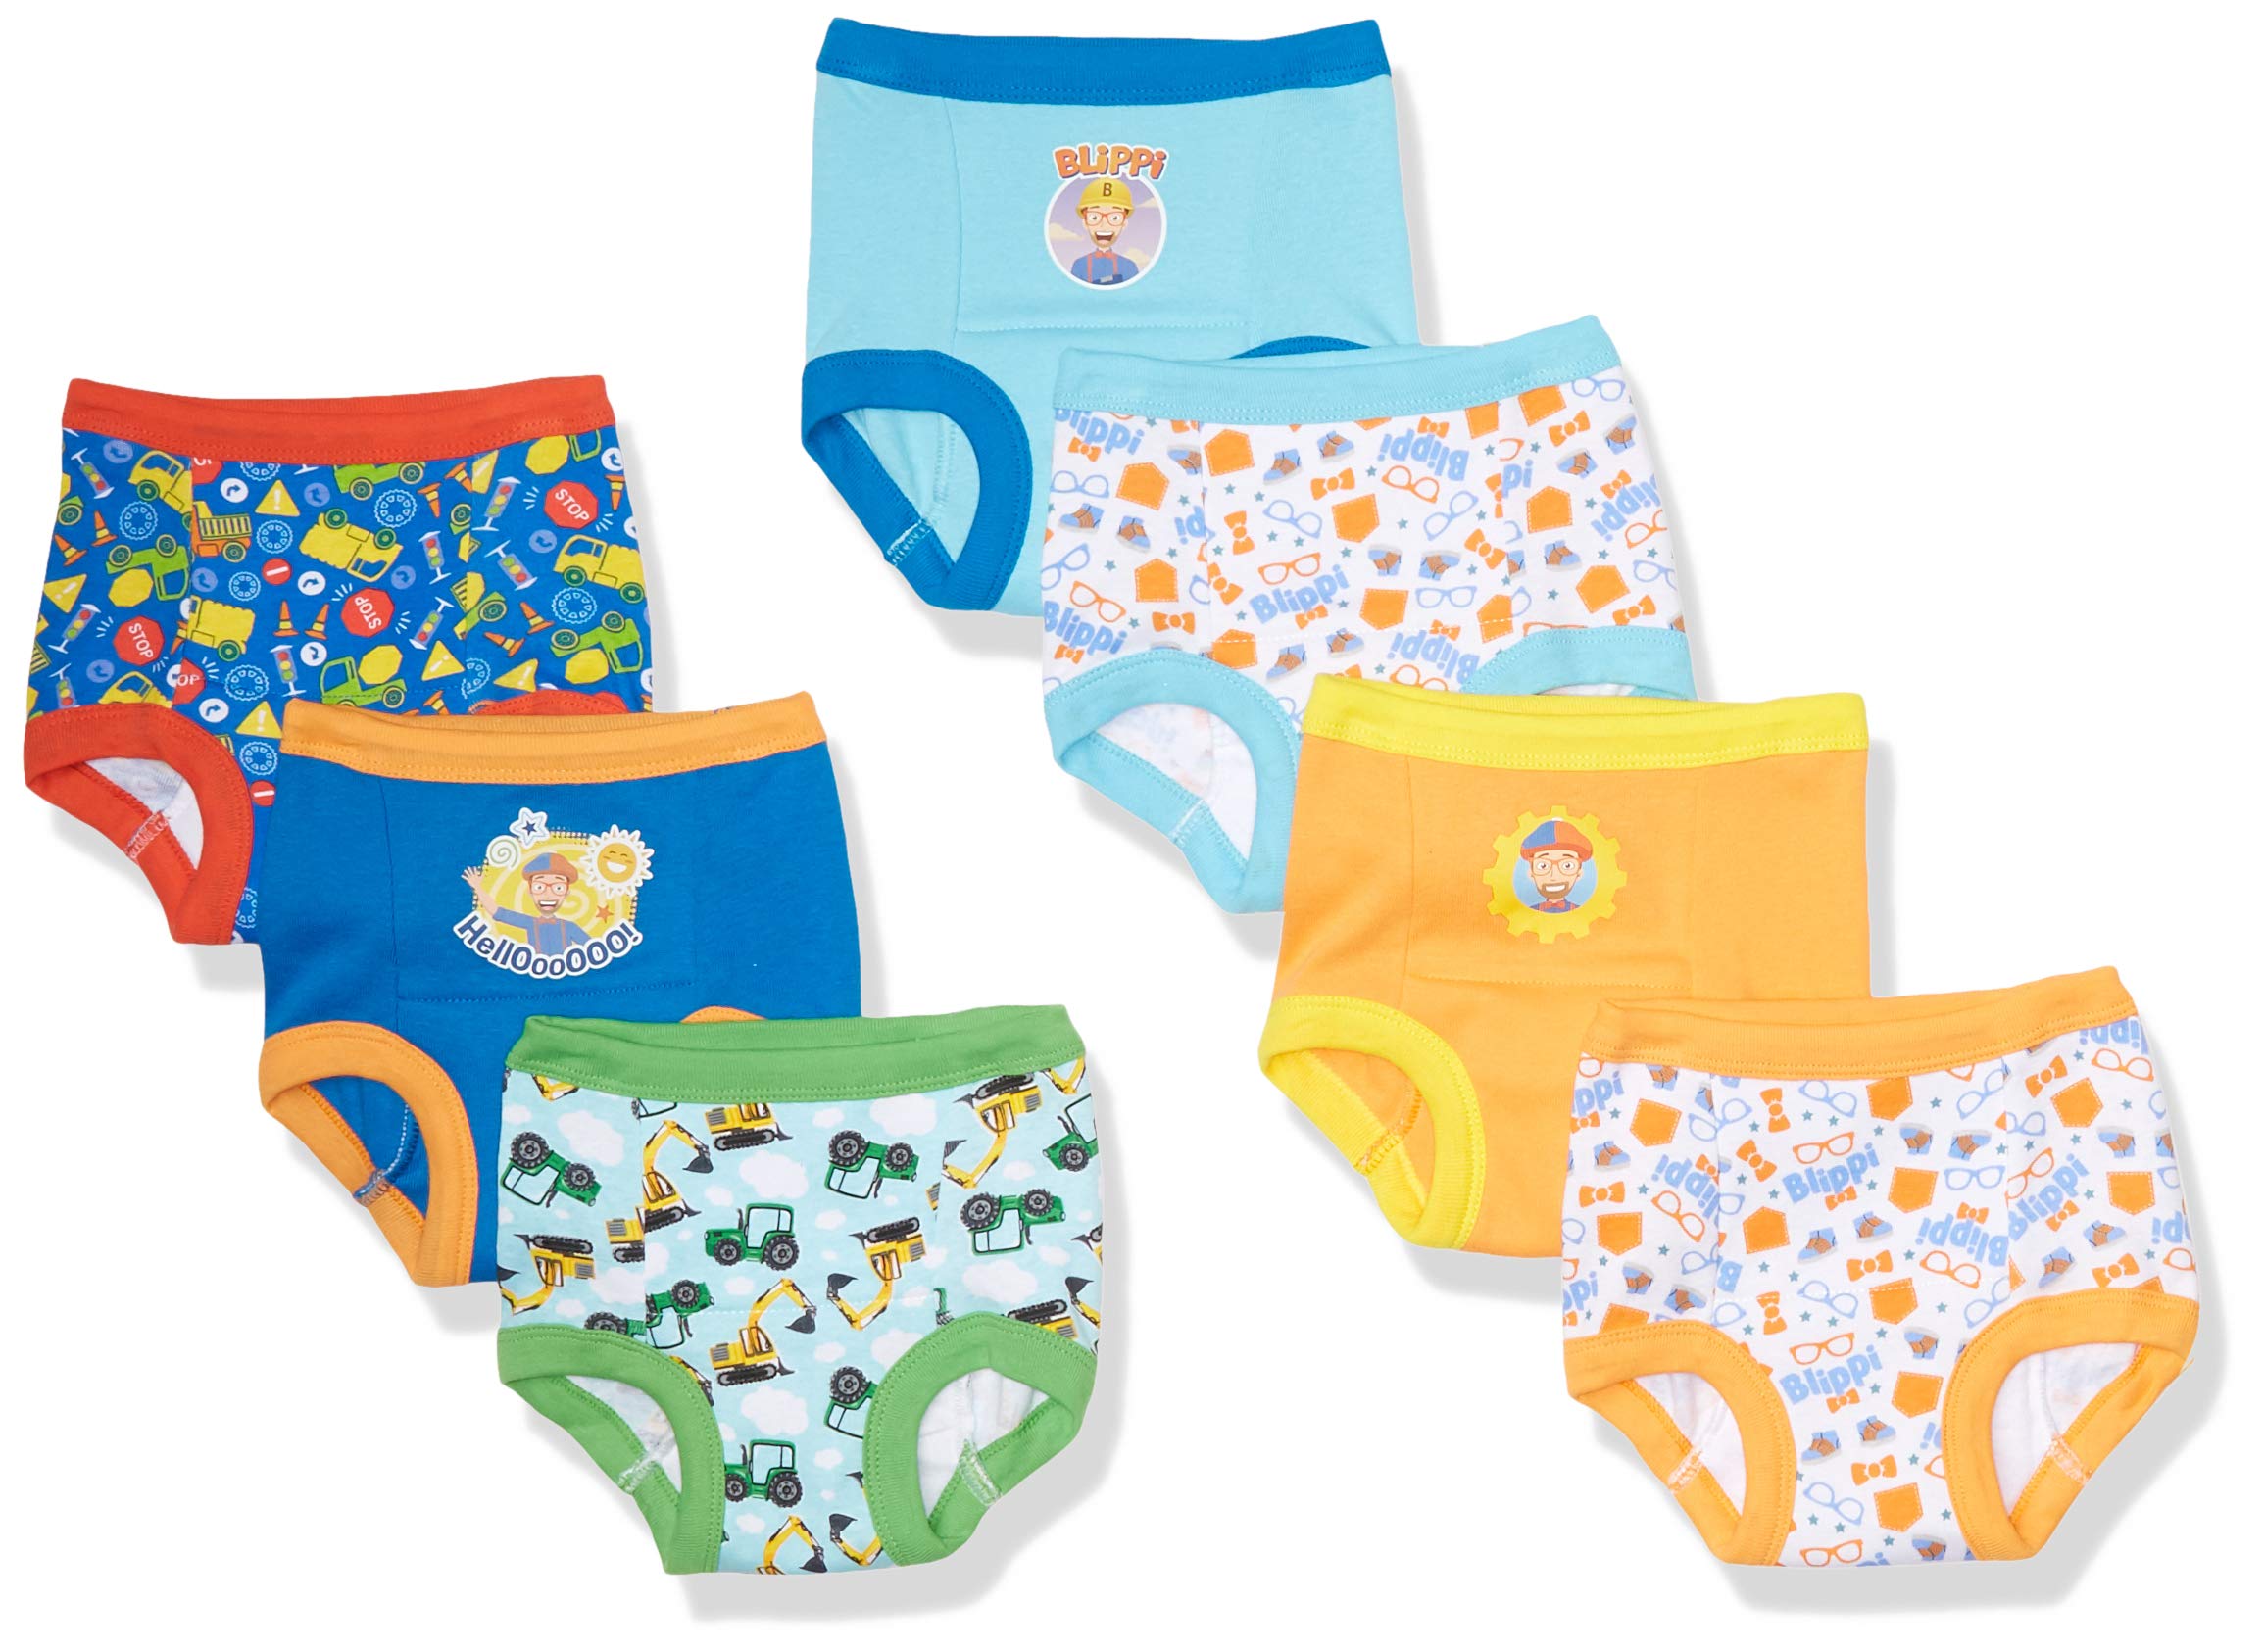 Bluey Unisex Baby  Exclusive Potty Training Pants with Stickers and  Success Chart, Sizes 18 M, 2T, 3T & 4T, 7-Pack